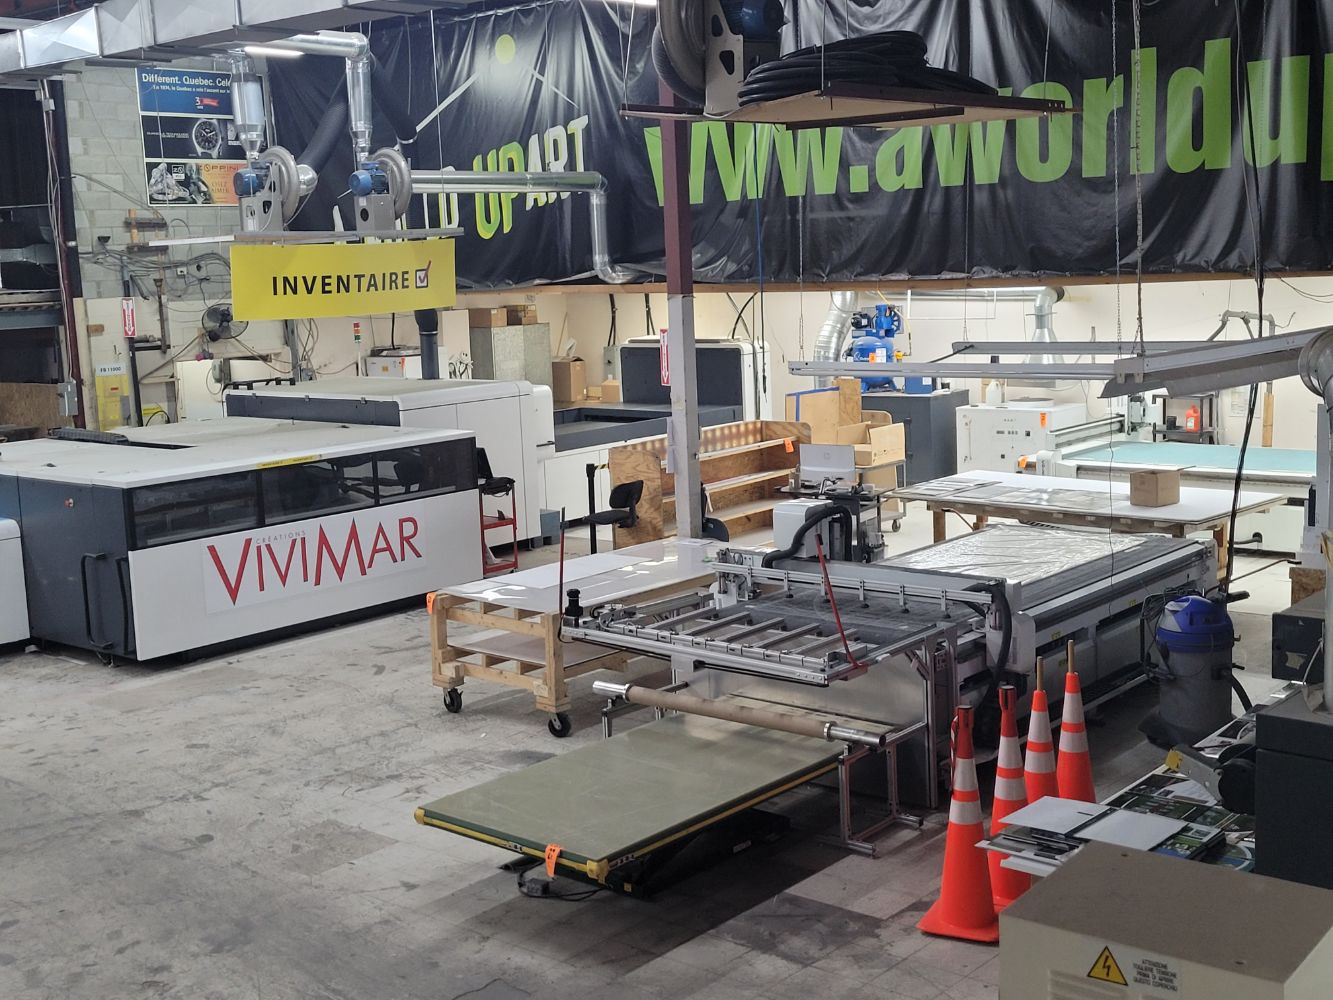 Commercial Printing & Screenprinting Facility in Montreal, QC - Formerly Creation Vivimar - Bankuptcy Auction, No Minimums or Reserves